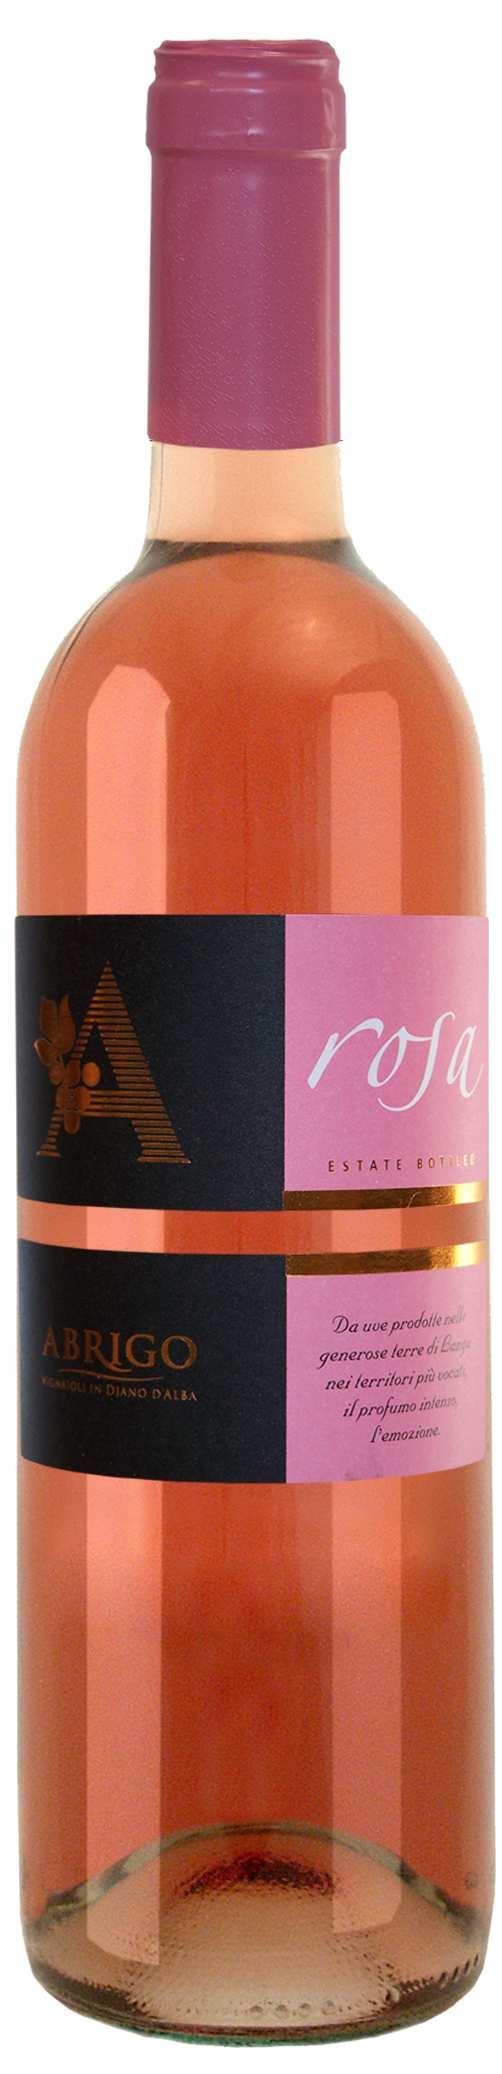 I ROSÉ WINE REÜSA THE YOUNGEST WINE OF THIS WINERY, CHARACTERIZED BY ITS INTENSE PERFUME AND PLEASANT TASTE.